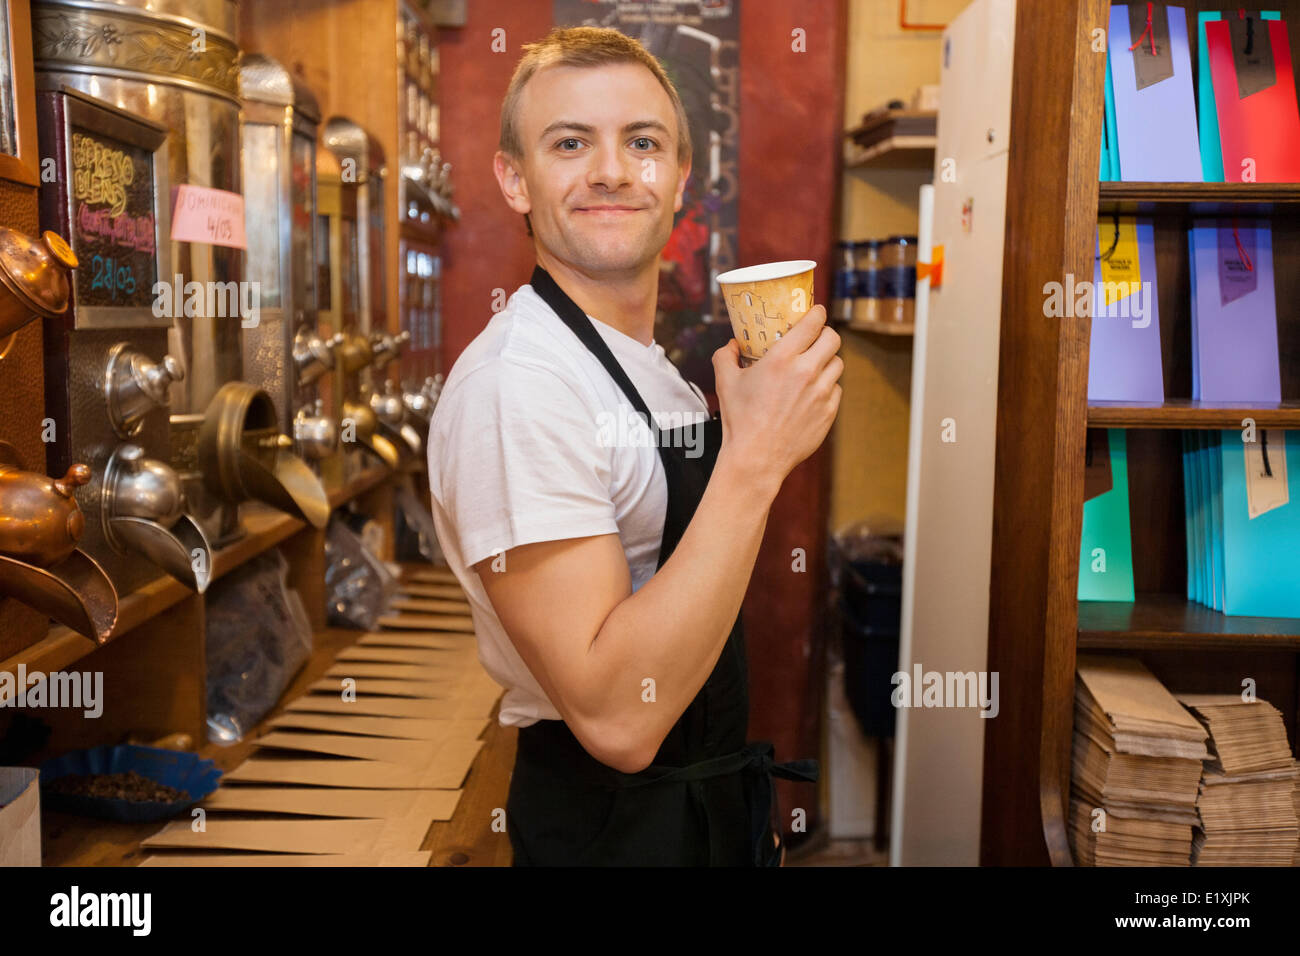 Portrait of male salesperson holding disposable coffee cup in store Stock Photo